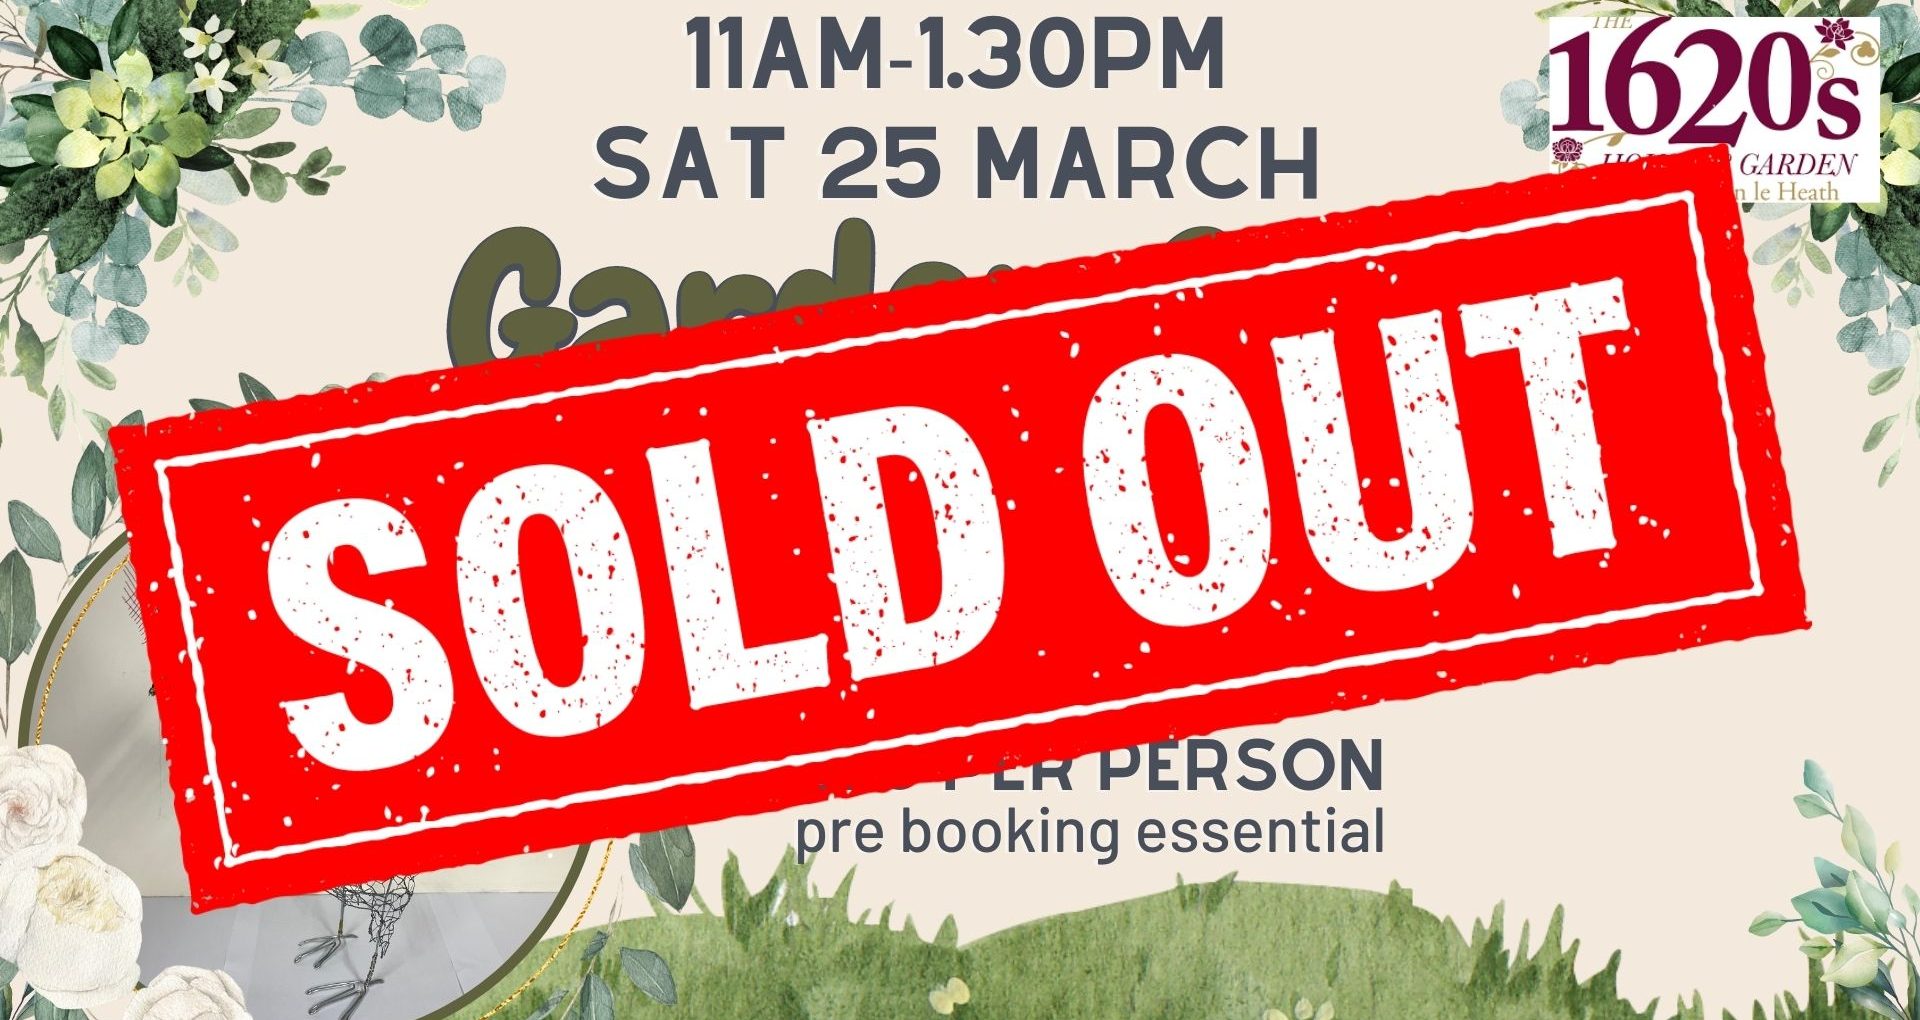 SOLD OUT - Garden Craft Morning